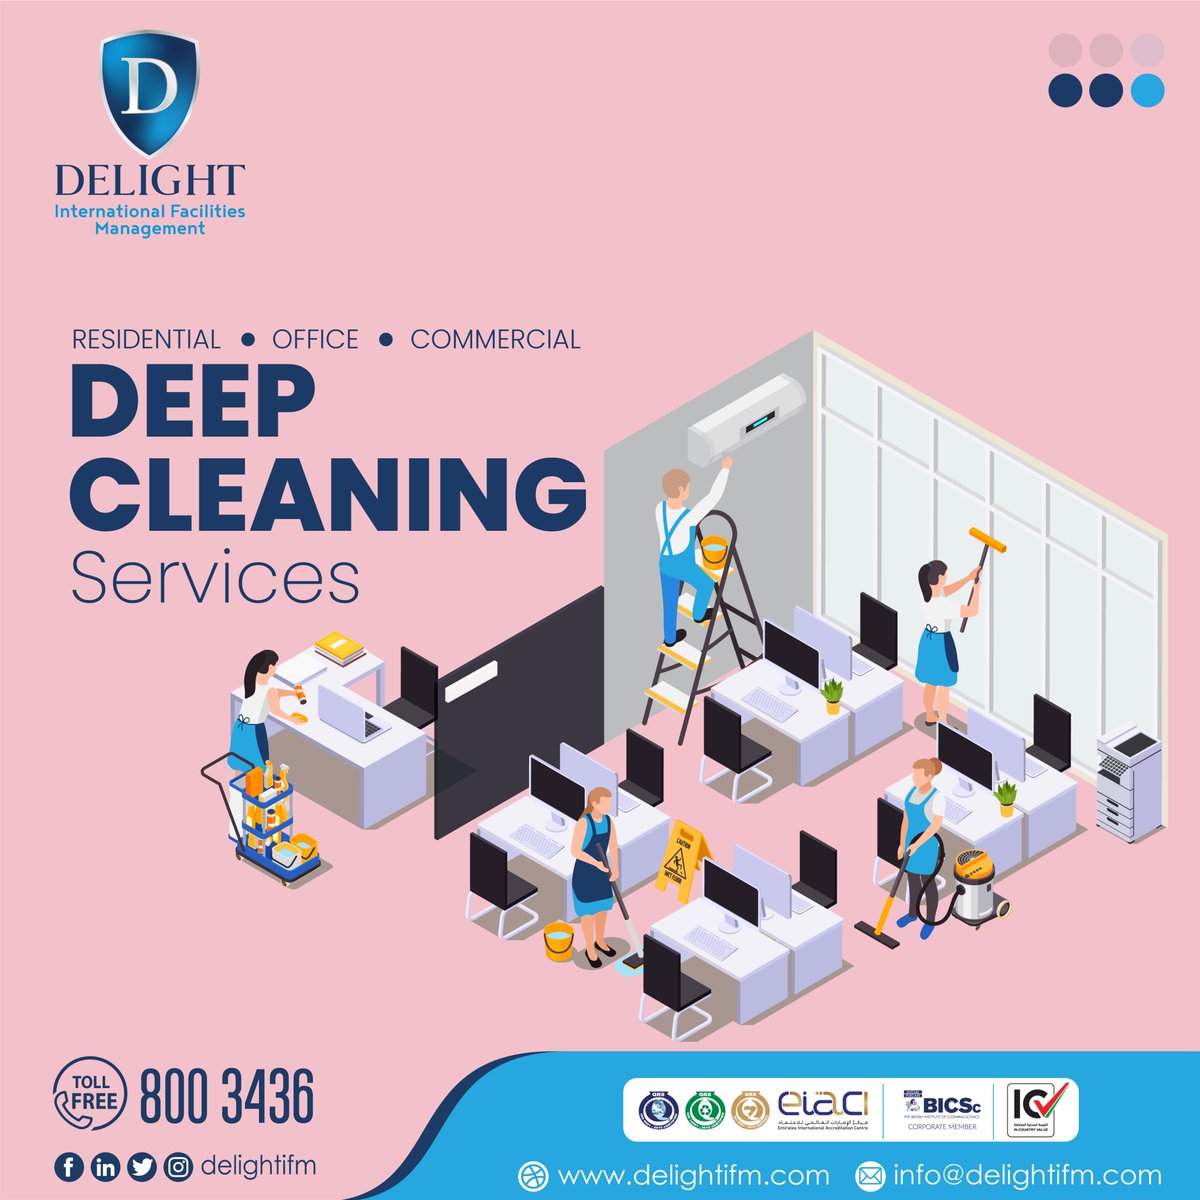 Deep cleaning services for Residential and Commercial in Abu Dhabi and Dubai. 
Book Now : delightifm.com
Call Now :  800 3436
#deepcleaningservices #deepcleaning #deepcleaninguae #DeepCleaningdubai #deepcleaningabudhabi #homecleaningservice #officecleaningservice